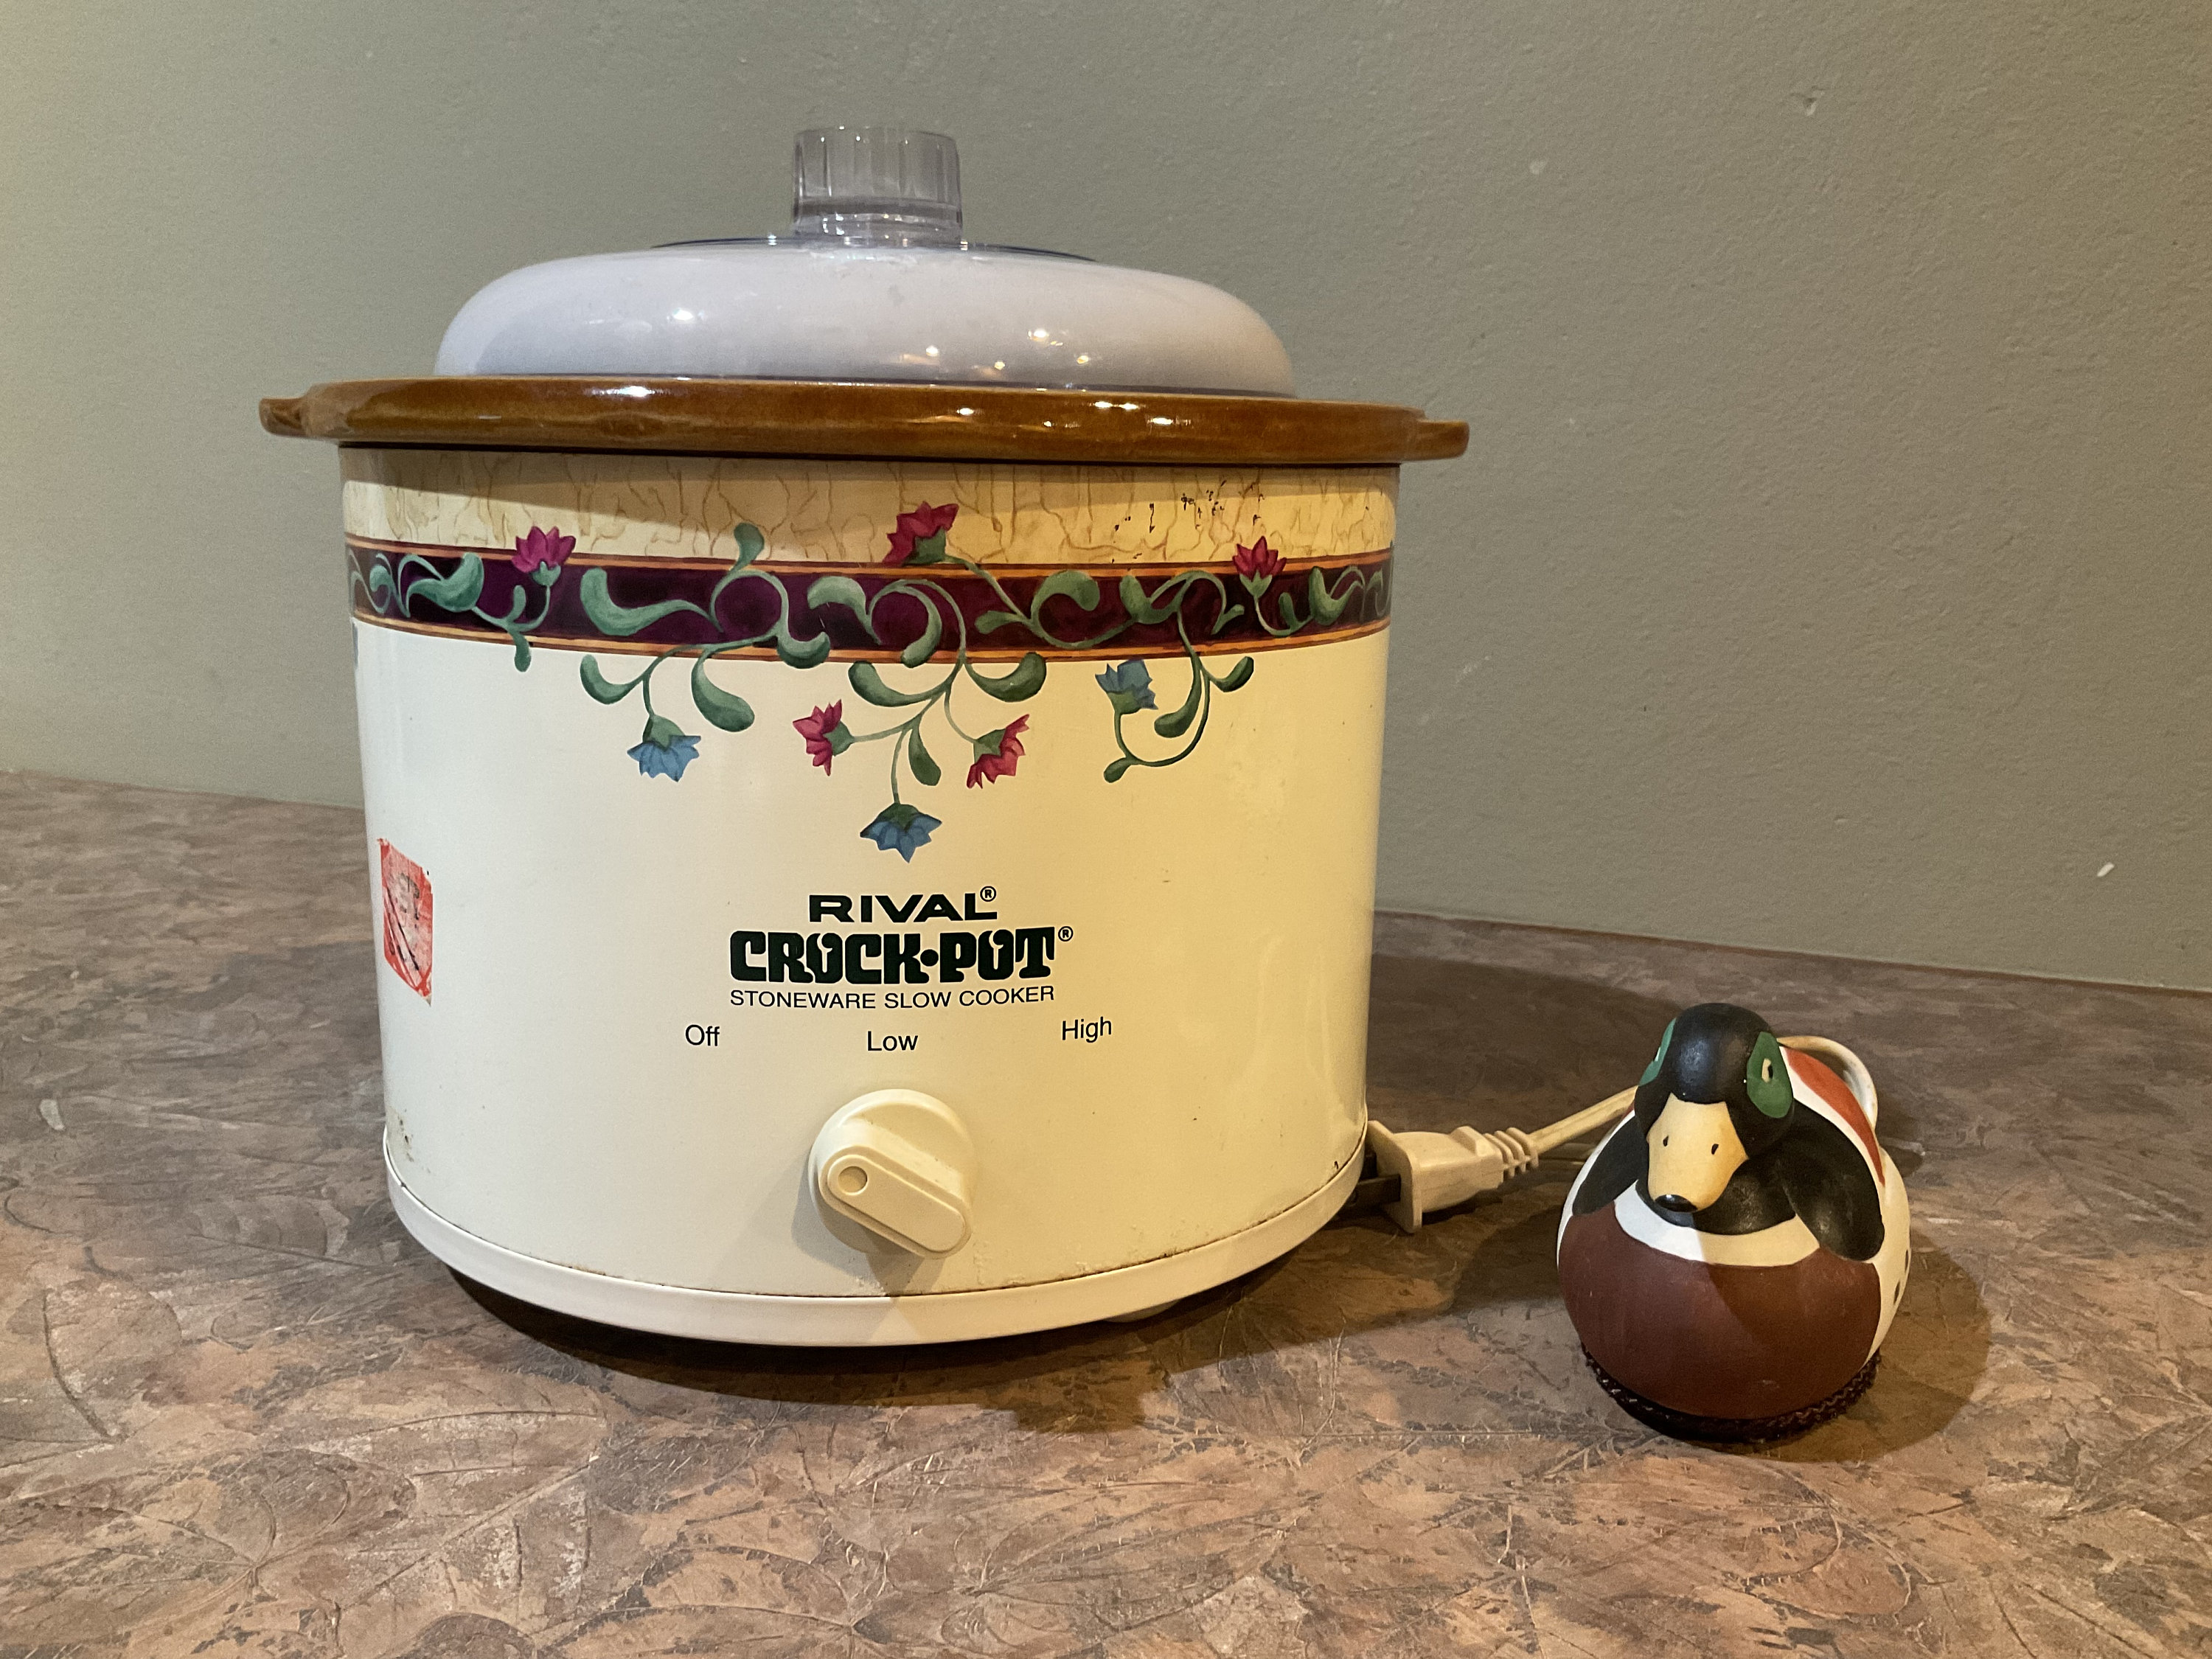 Vintage Avocado Green Rival Crock Pot Slow Cooker 3100/2 working condition